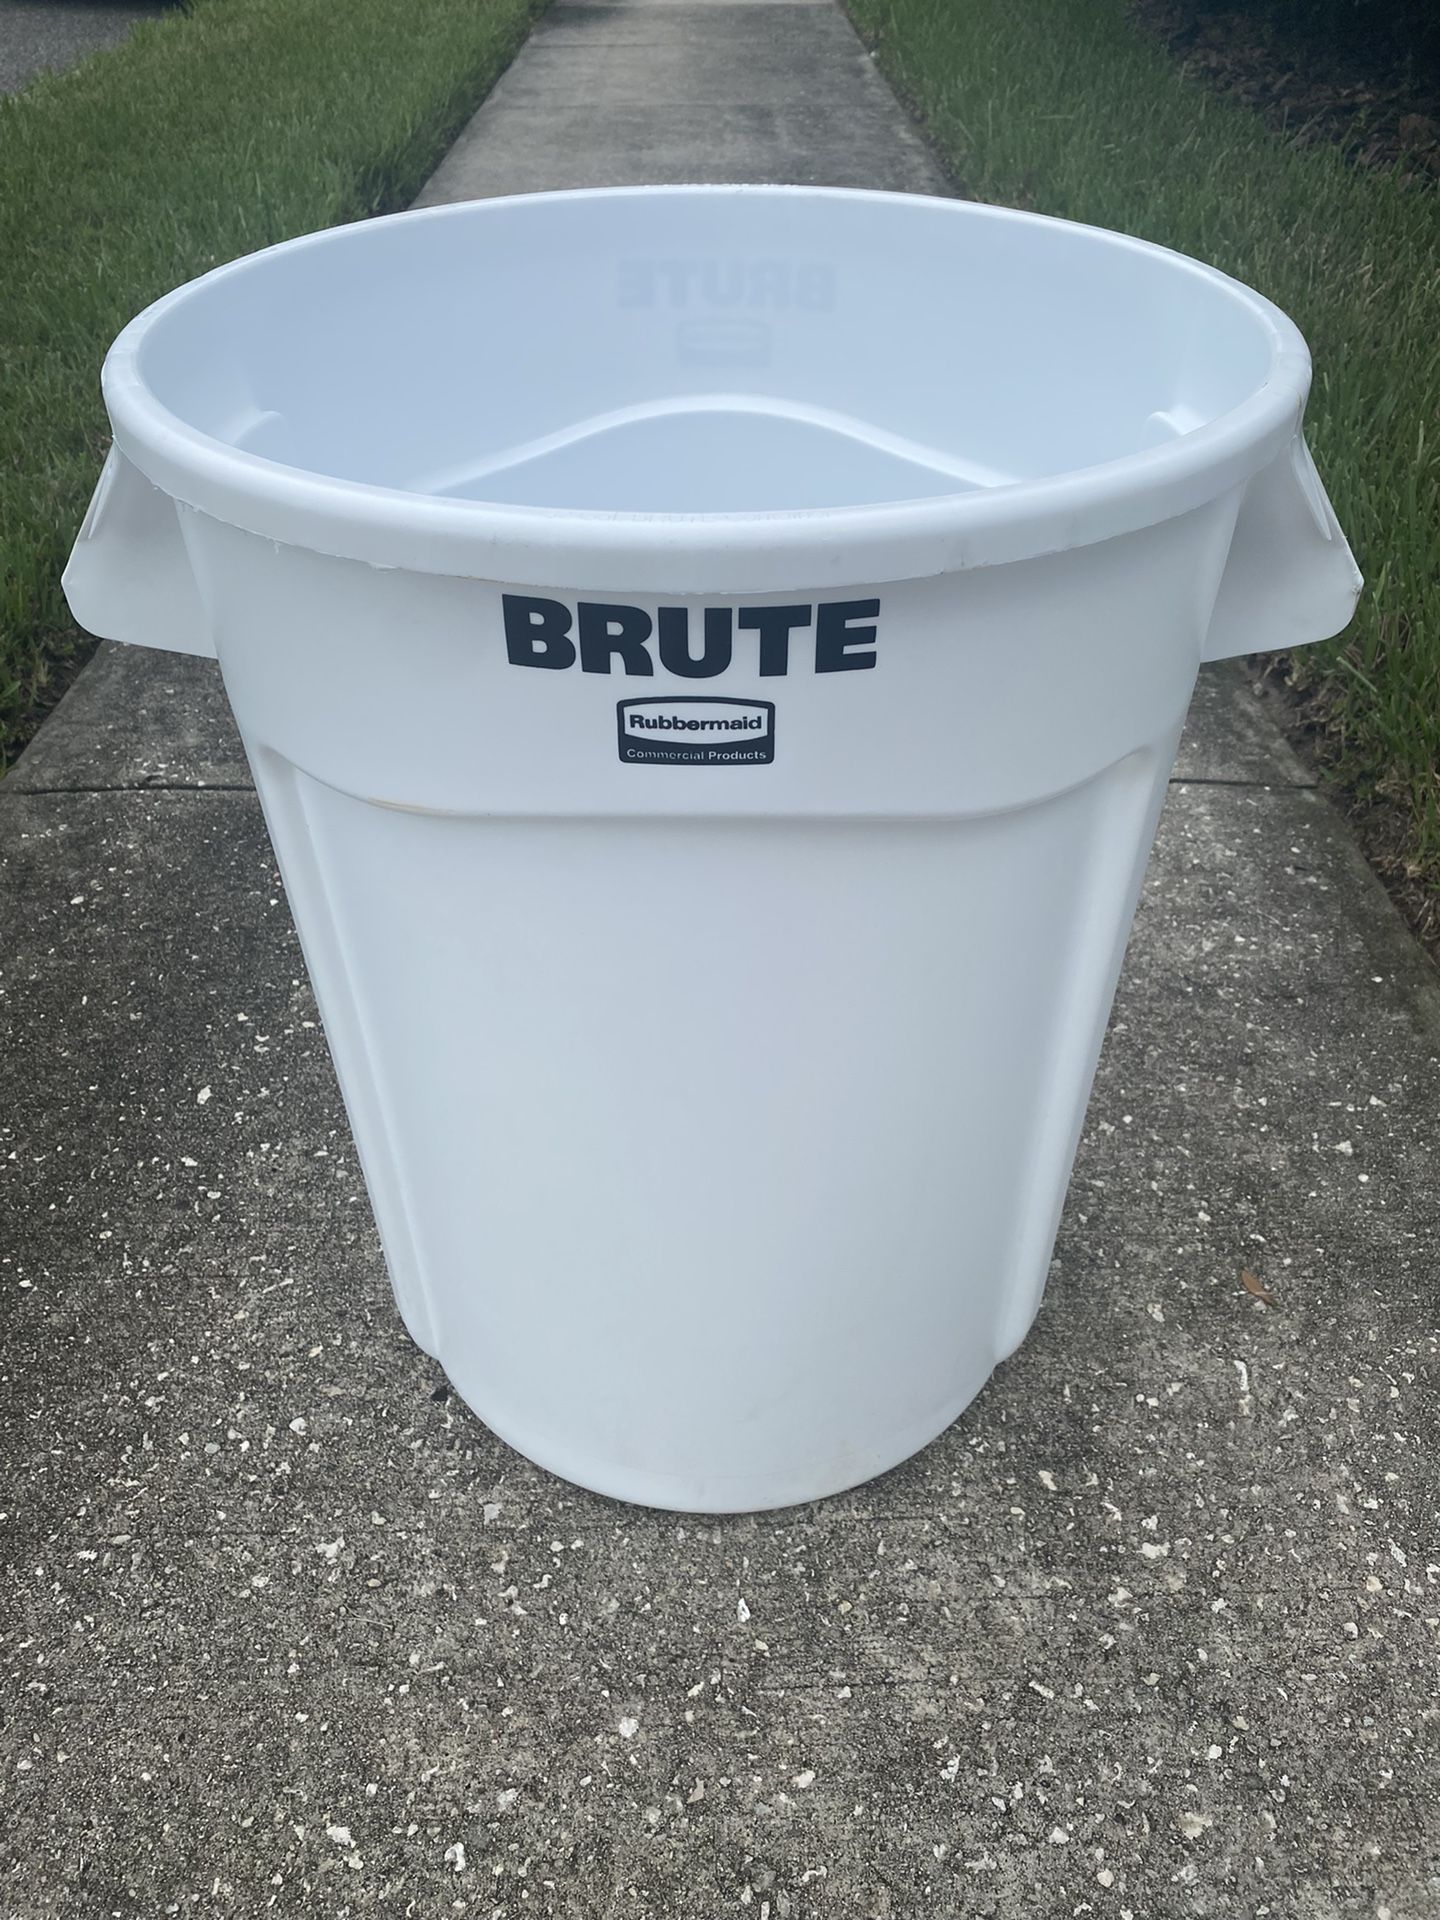 Rubbermaid Brute White 32 Gallon Commercial Trash Cans